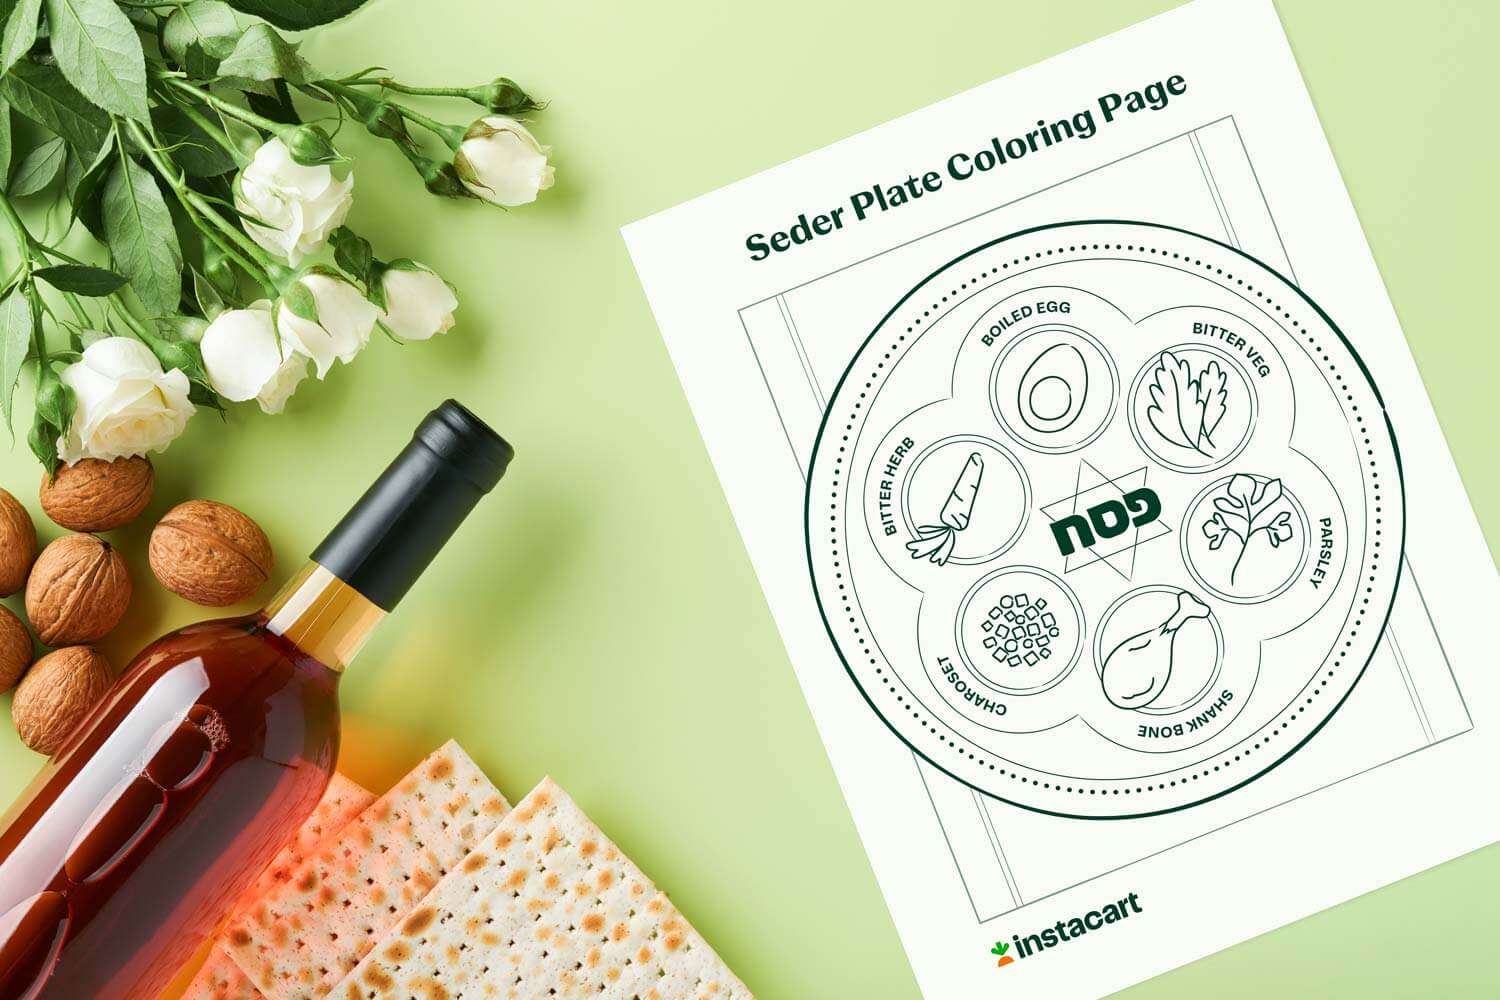 seder plate coloring page for Passover